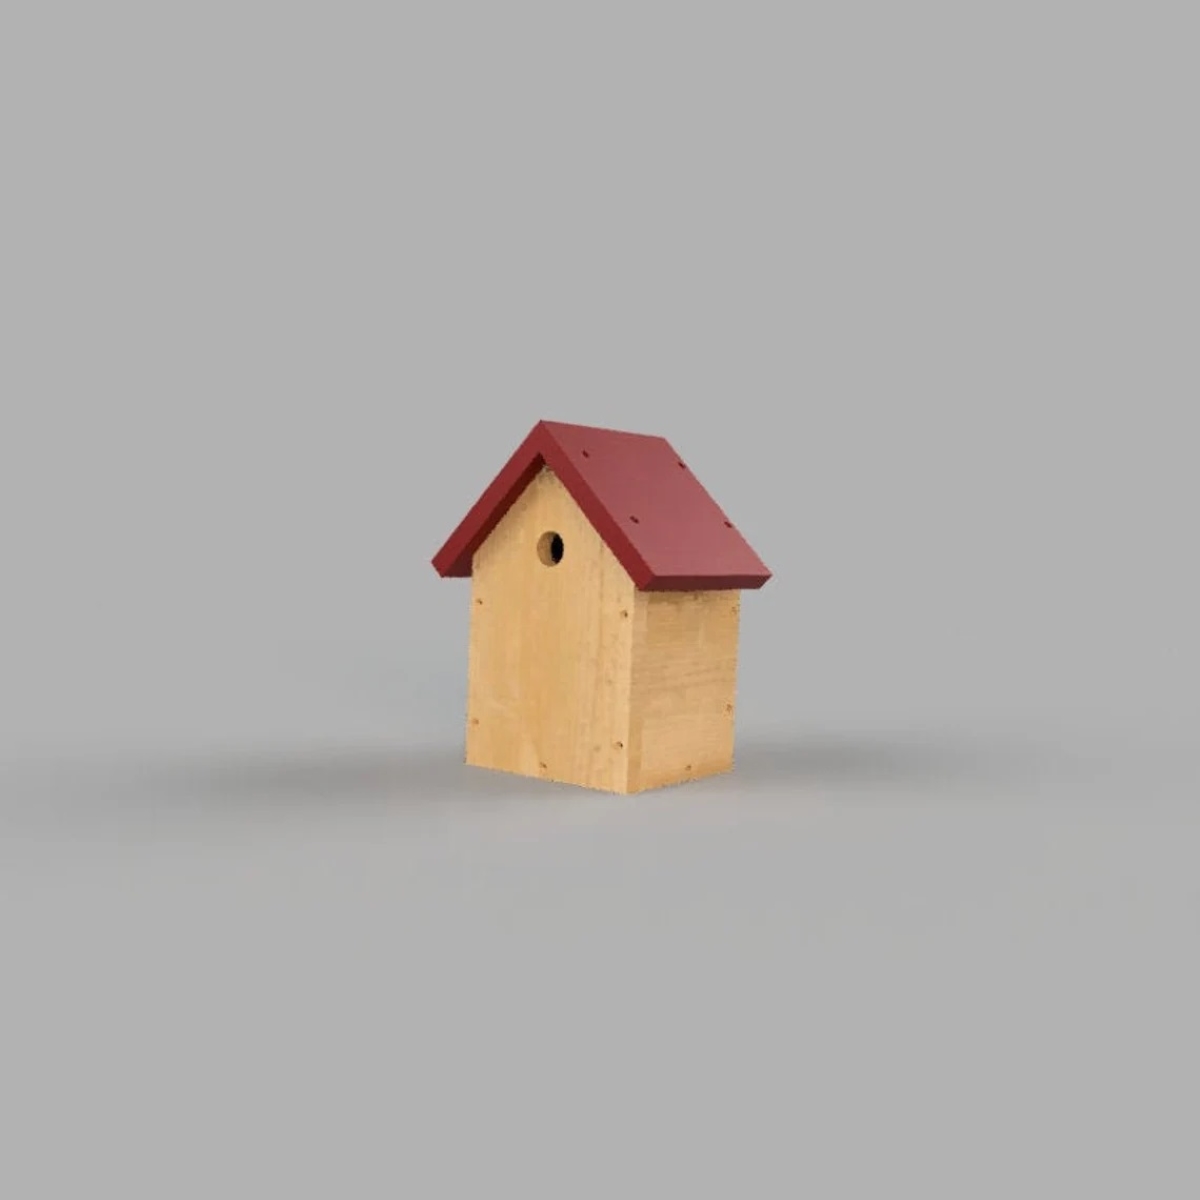 birdhouse plans - small wooden birdhouse with red roof